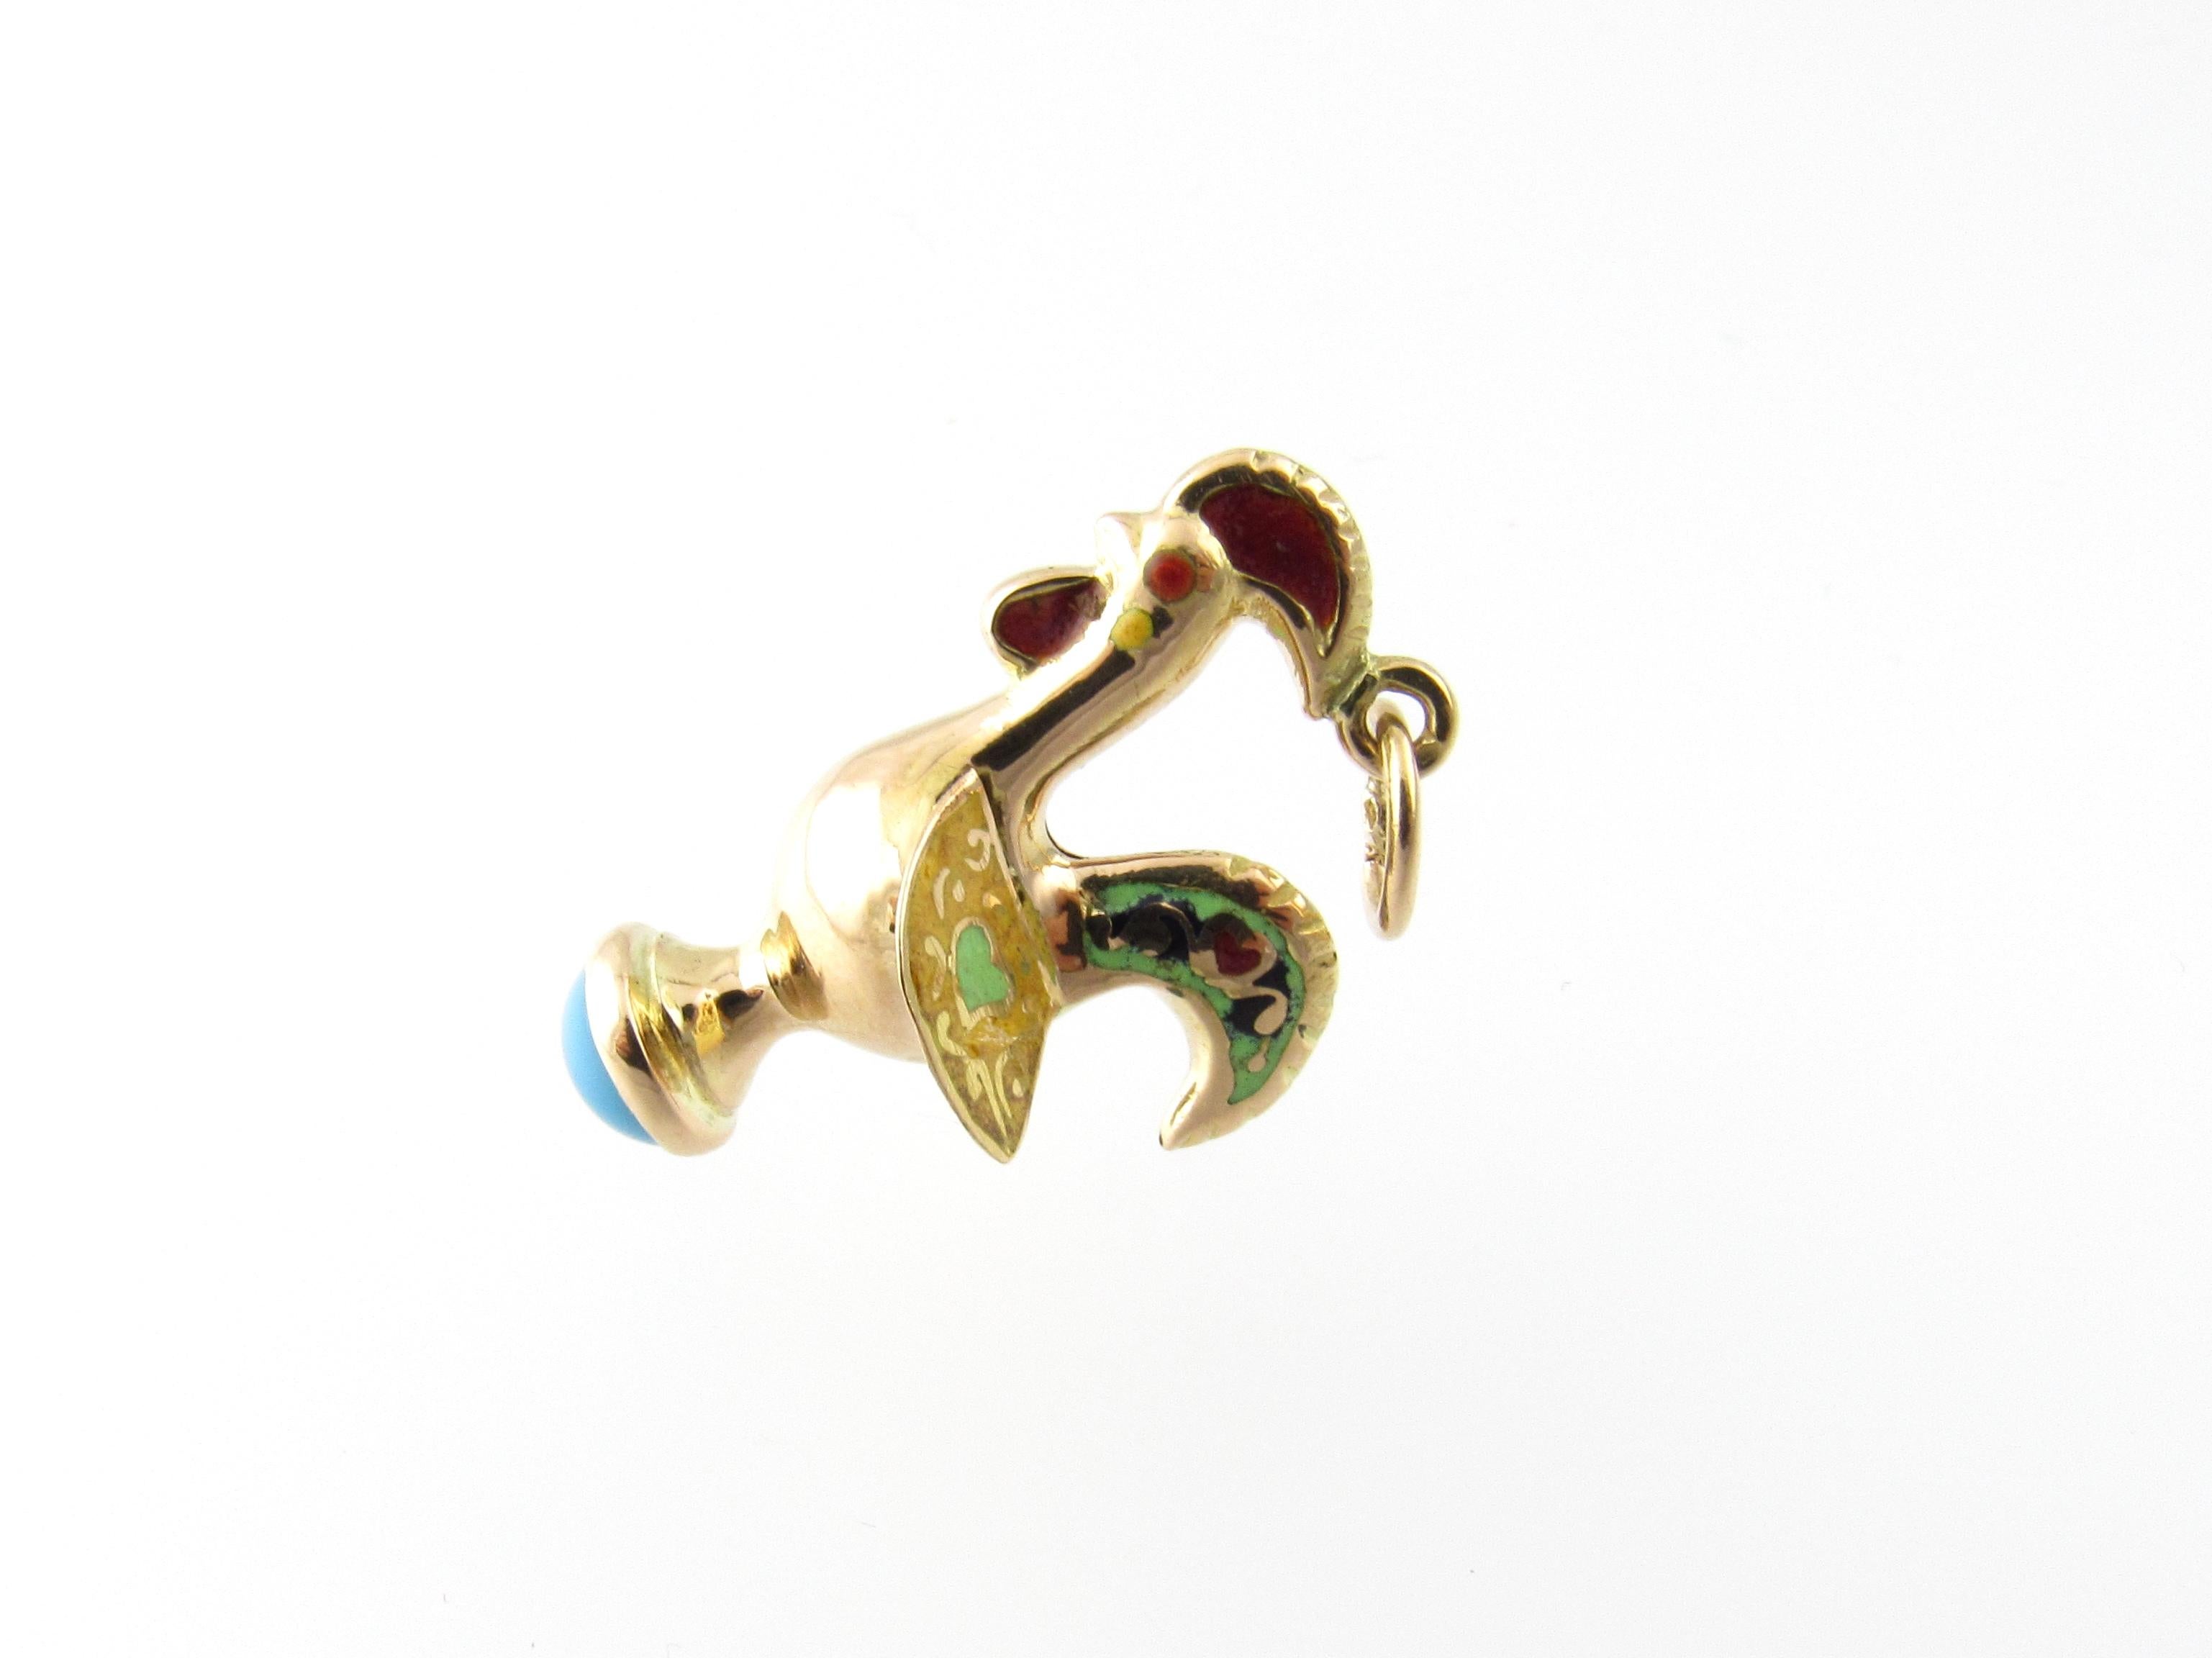 Vintage 14 Karat Yellow Gold and Turquoise Rooster Charm

Roosters signify fidelity, luck and protection.

This lovely charm features a 3D rooster decorated with colorful enamel and accented with a turquoise stone set in beautifully detailed 14K